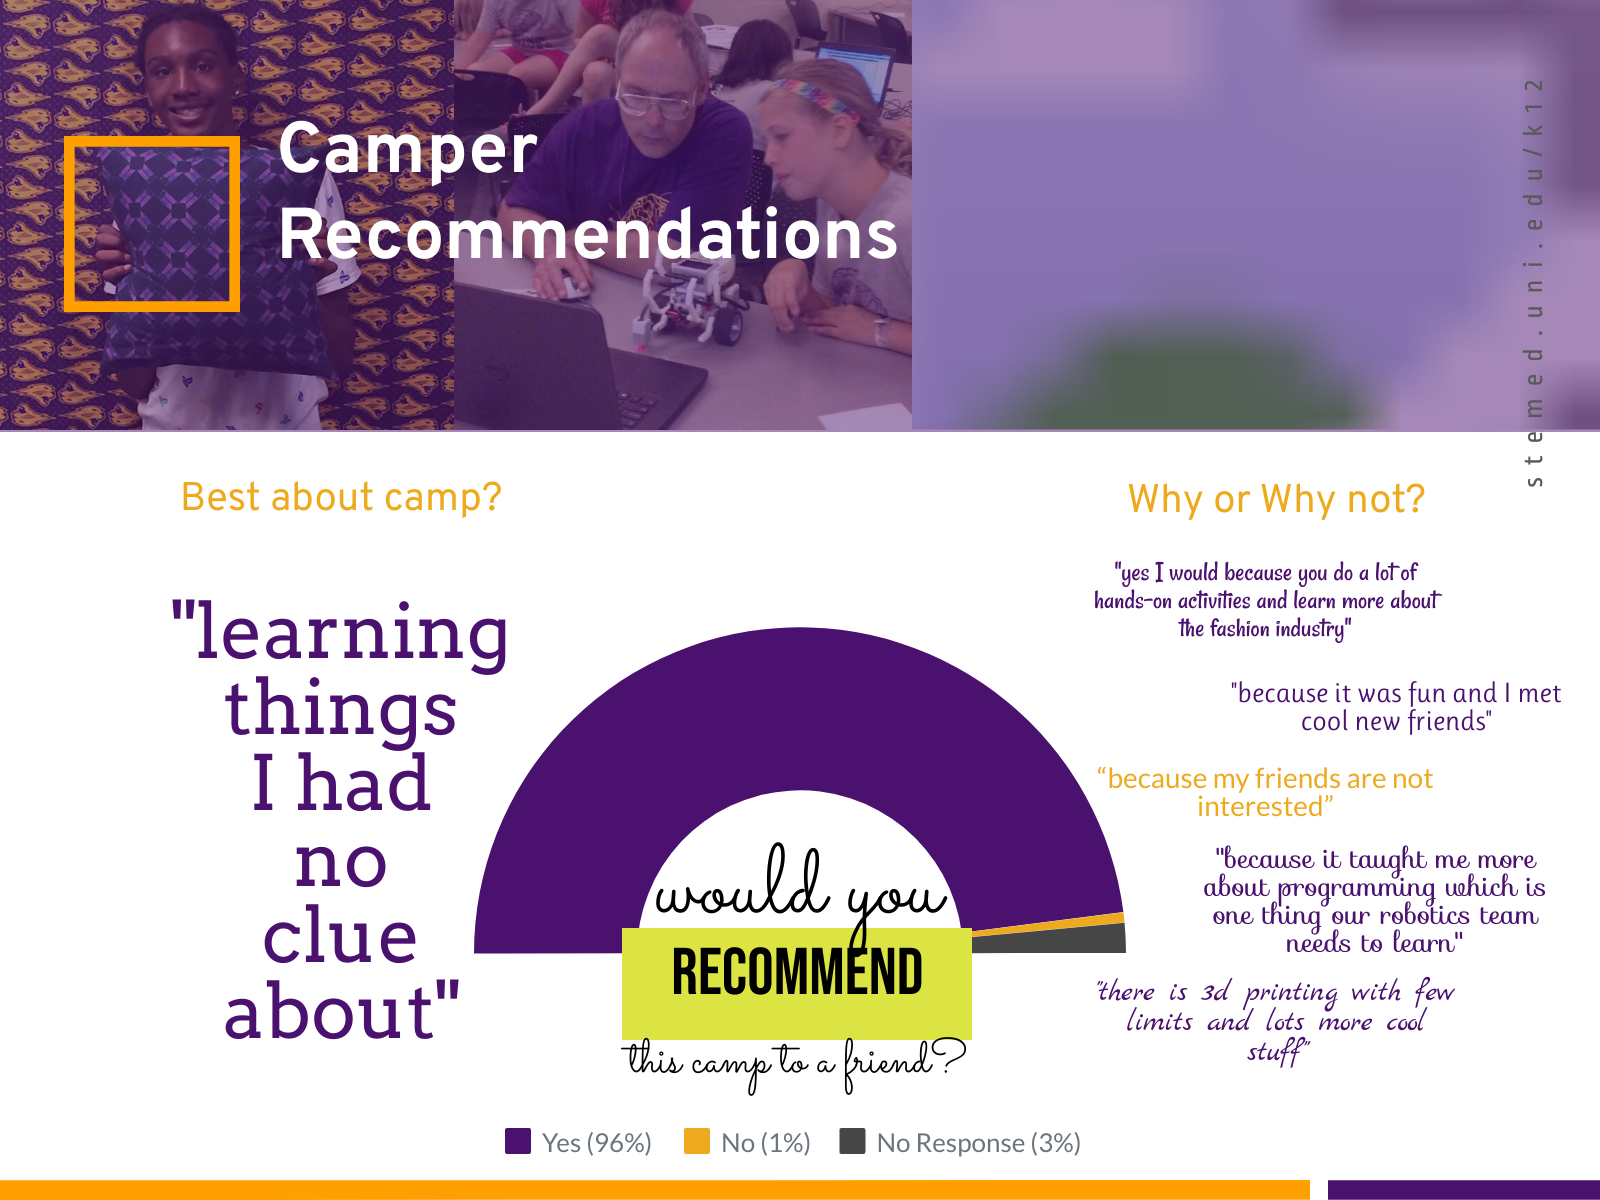 A graph illustrates that 96% of campers would recommend the camp they attended to a friend.